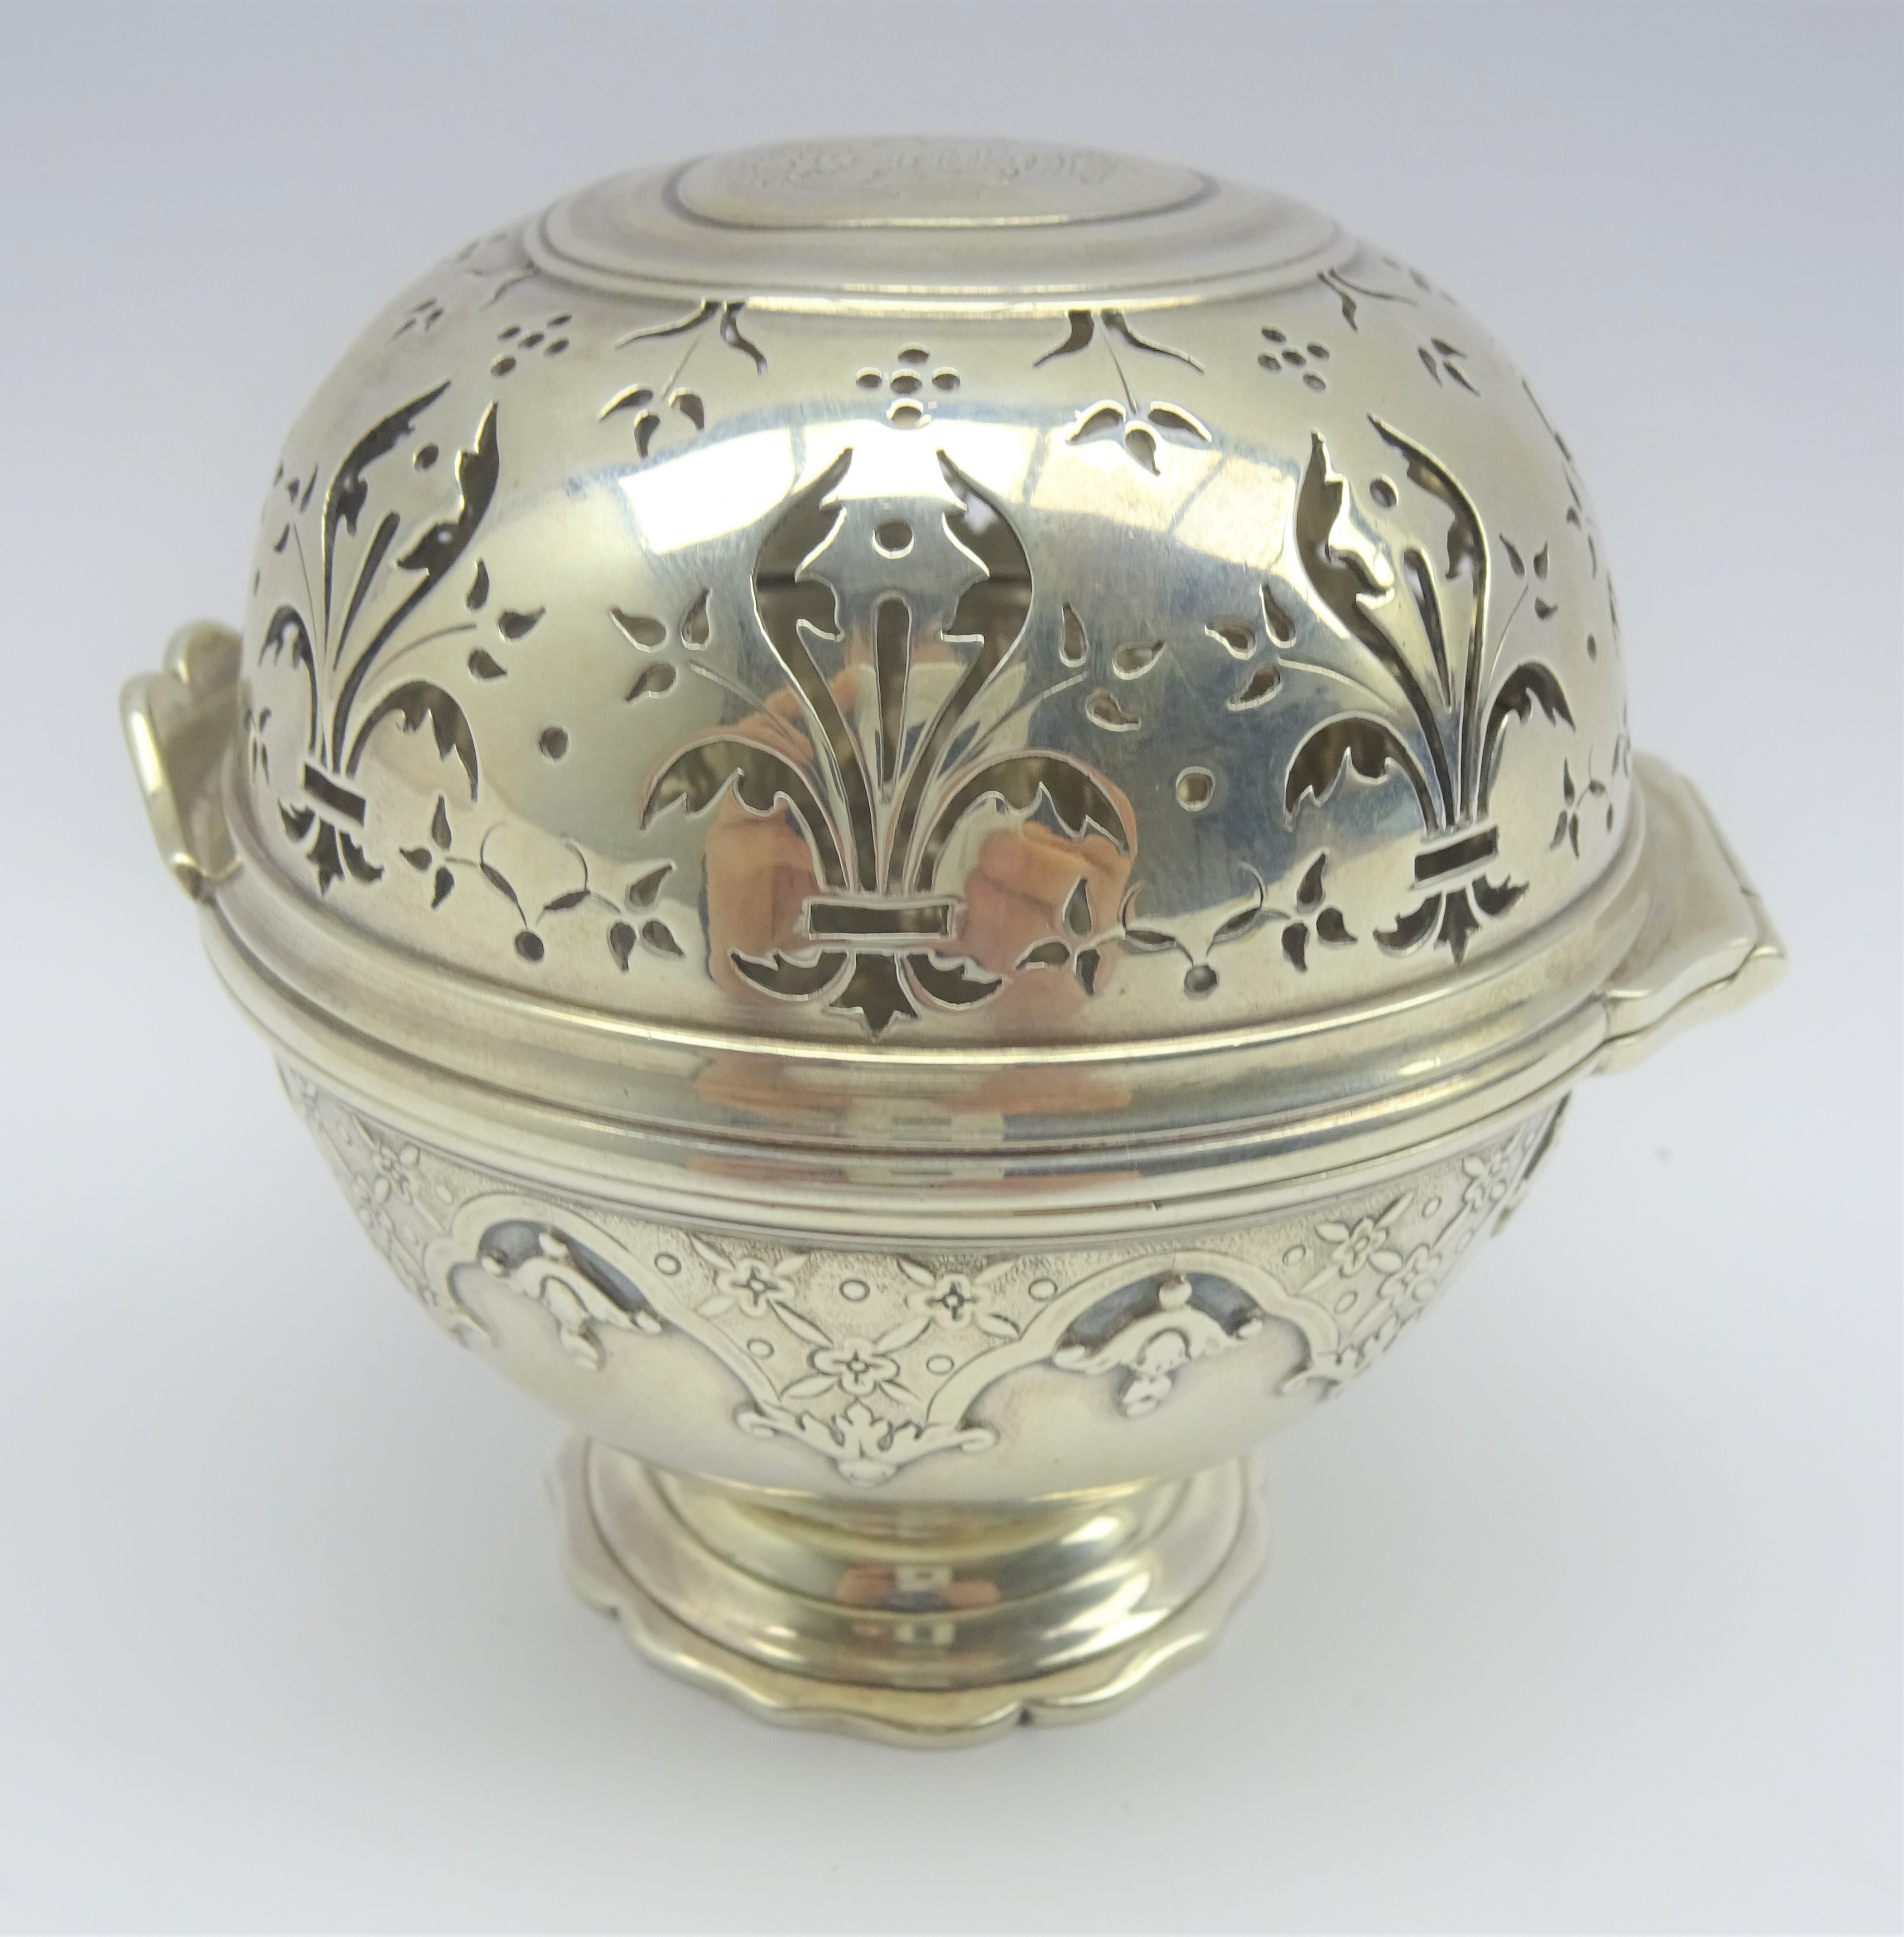 French silver sponge box of circular design with pierced cover and engraved with a coat of arms on